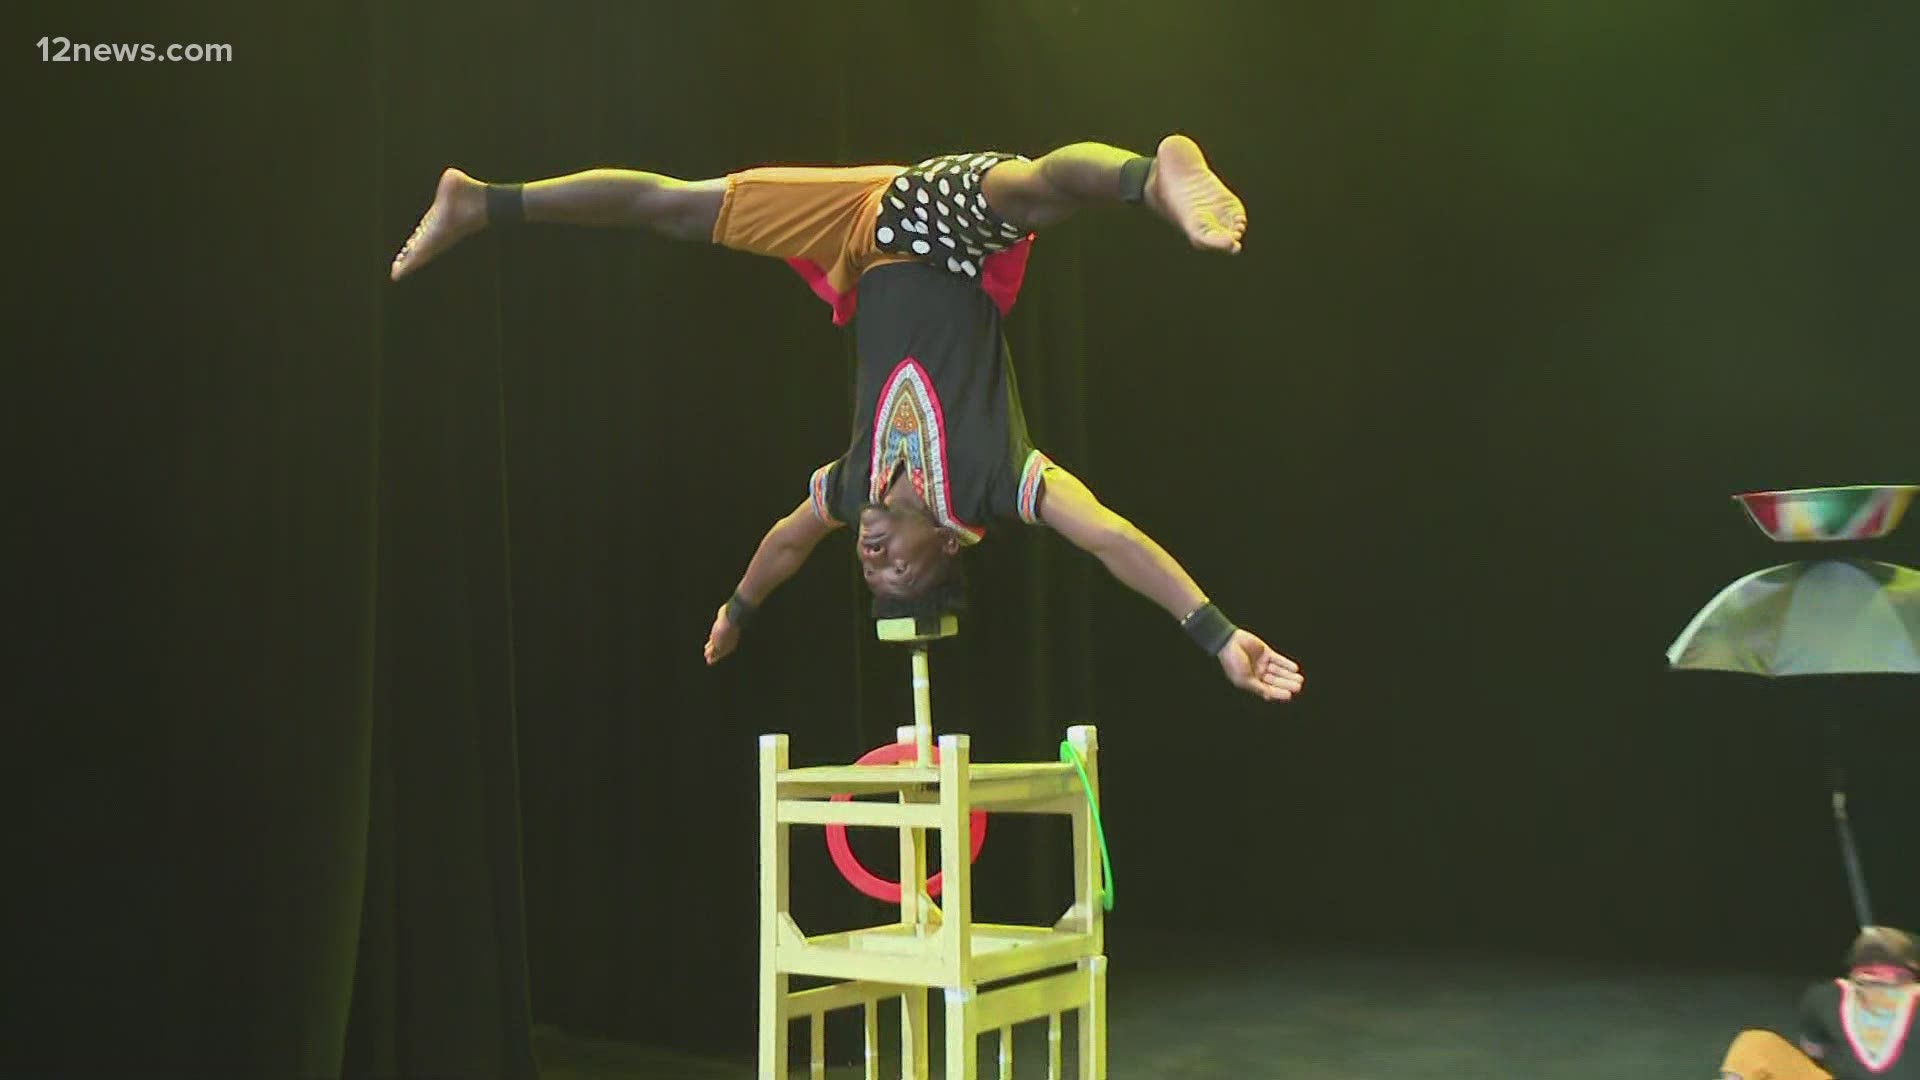 The Zuzu African acrobats are ready to perform on stage in Phoenix. Jen Wahl gives us a preview of their show.